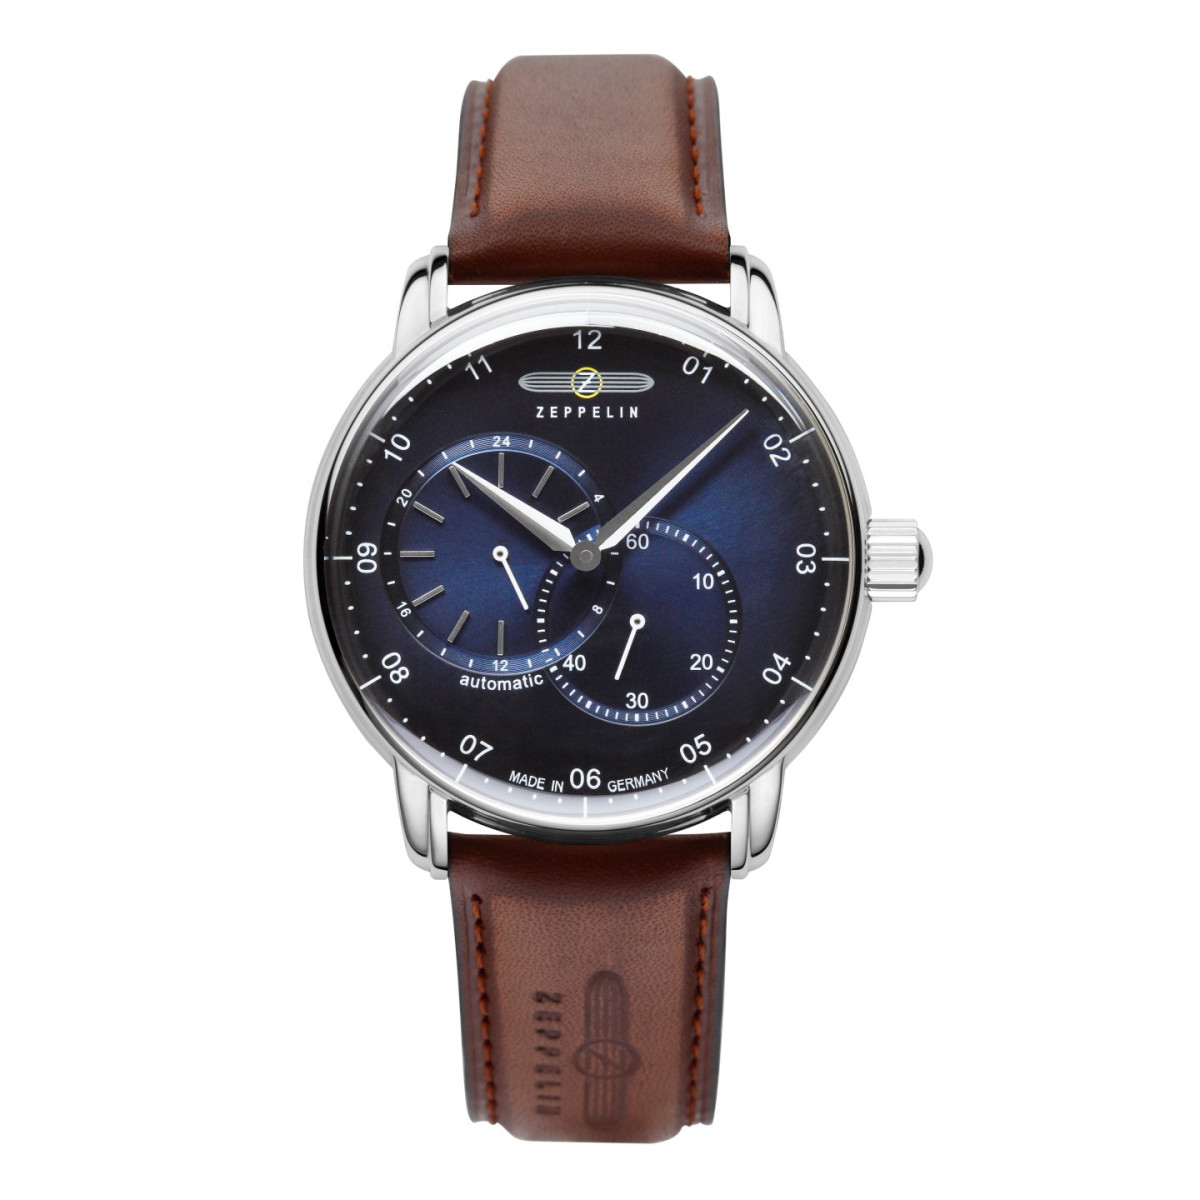 Zeppelin New Captain's Line Automatic with 24-hour display and leather strap